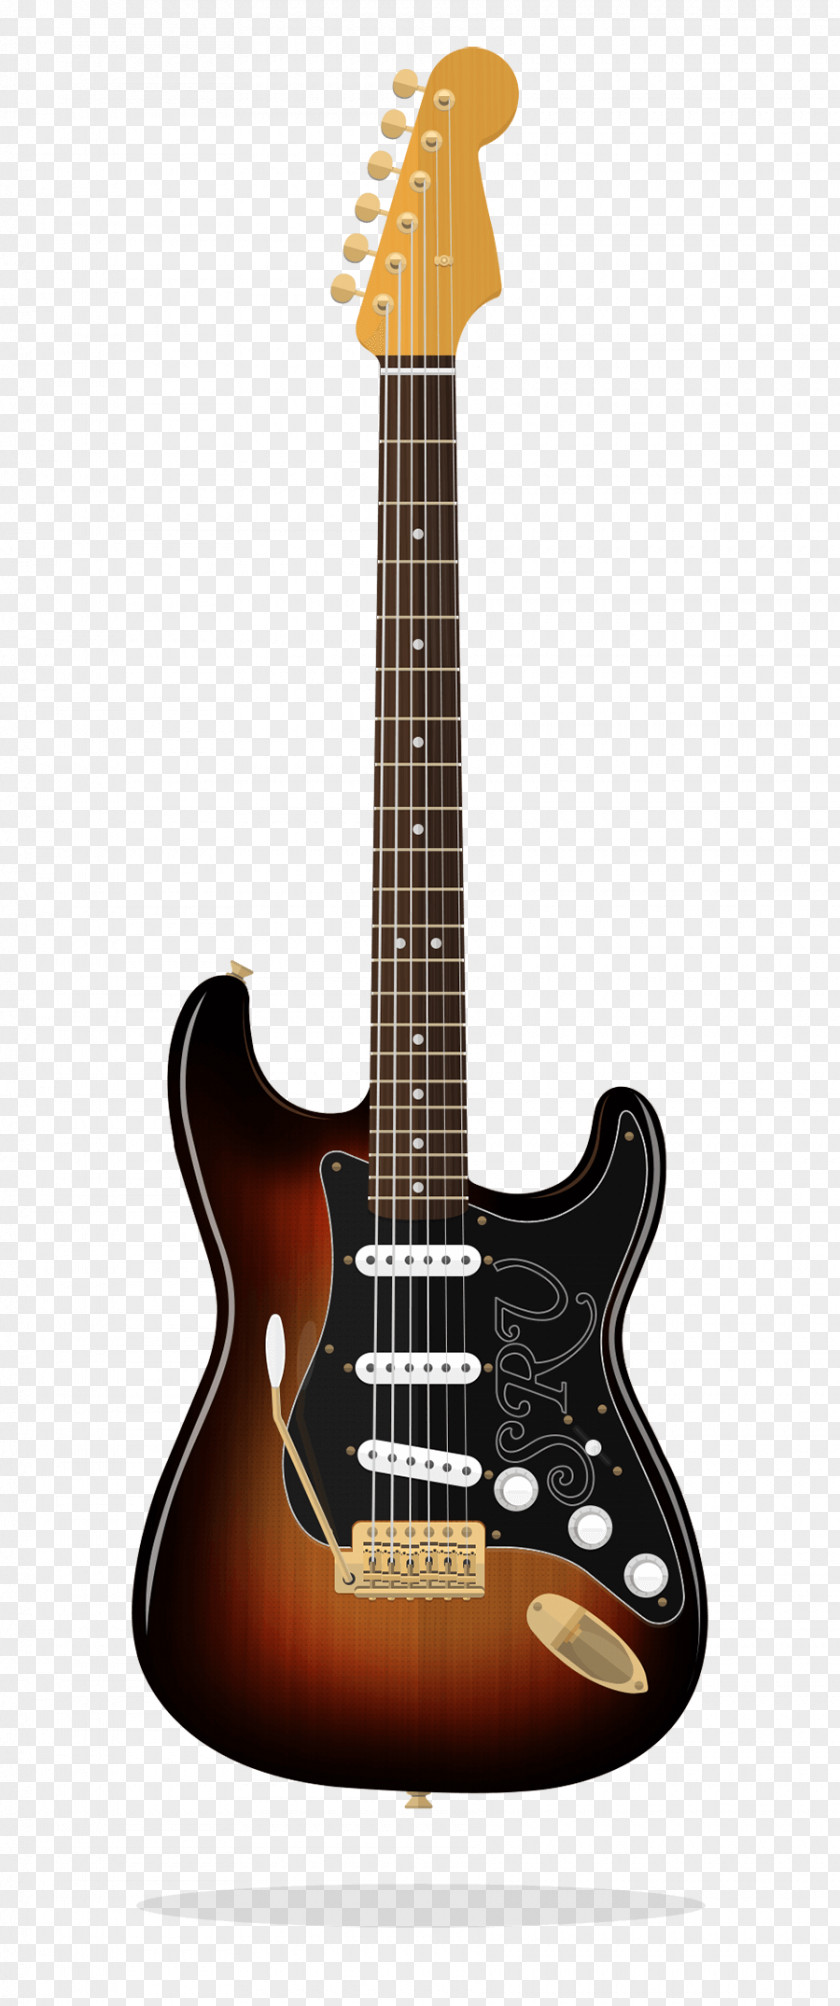 Electric Guitar Fender Stratocaster Musical Instruments Corporation Solid Body Custom Shop PNG